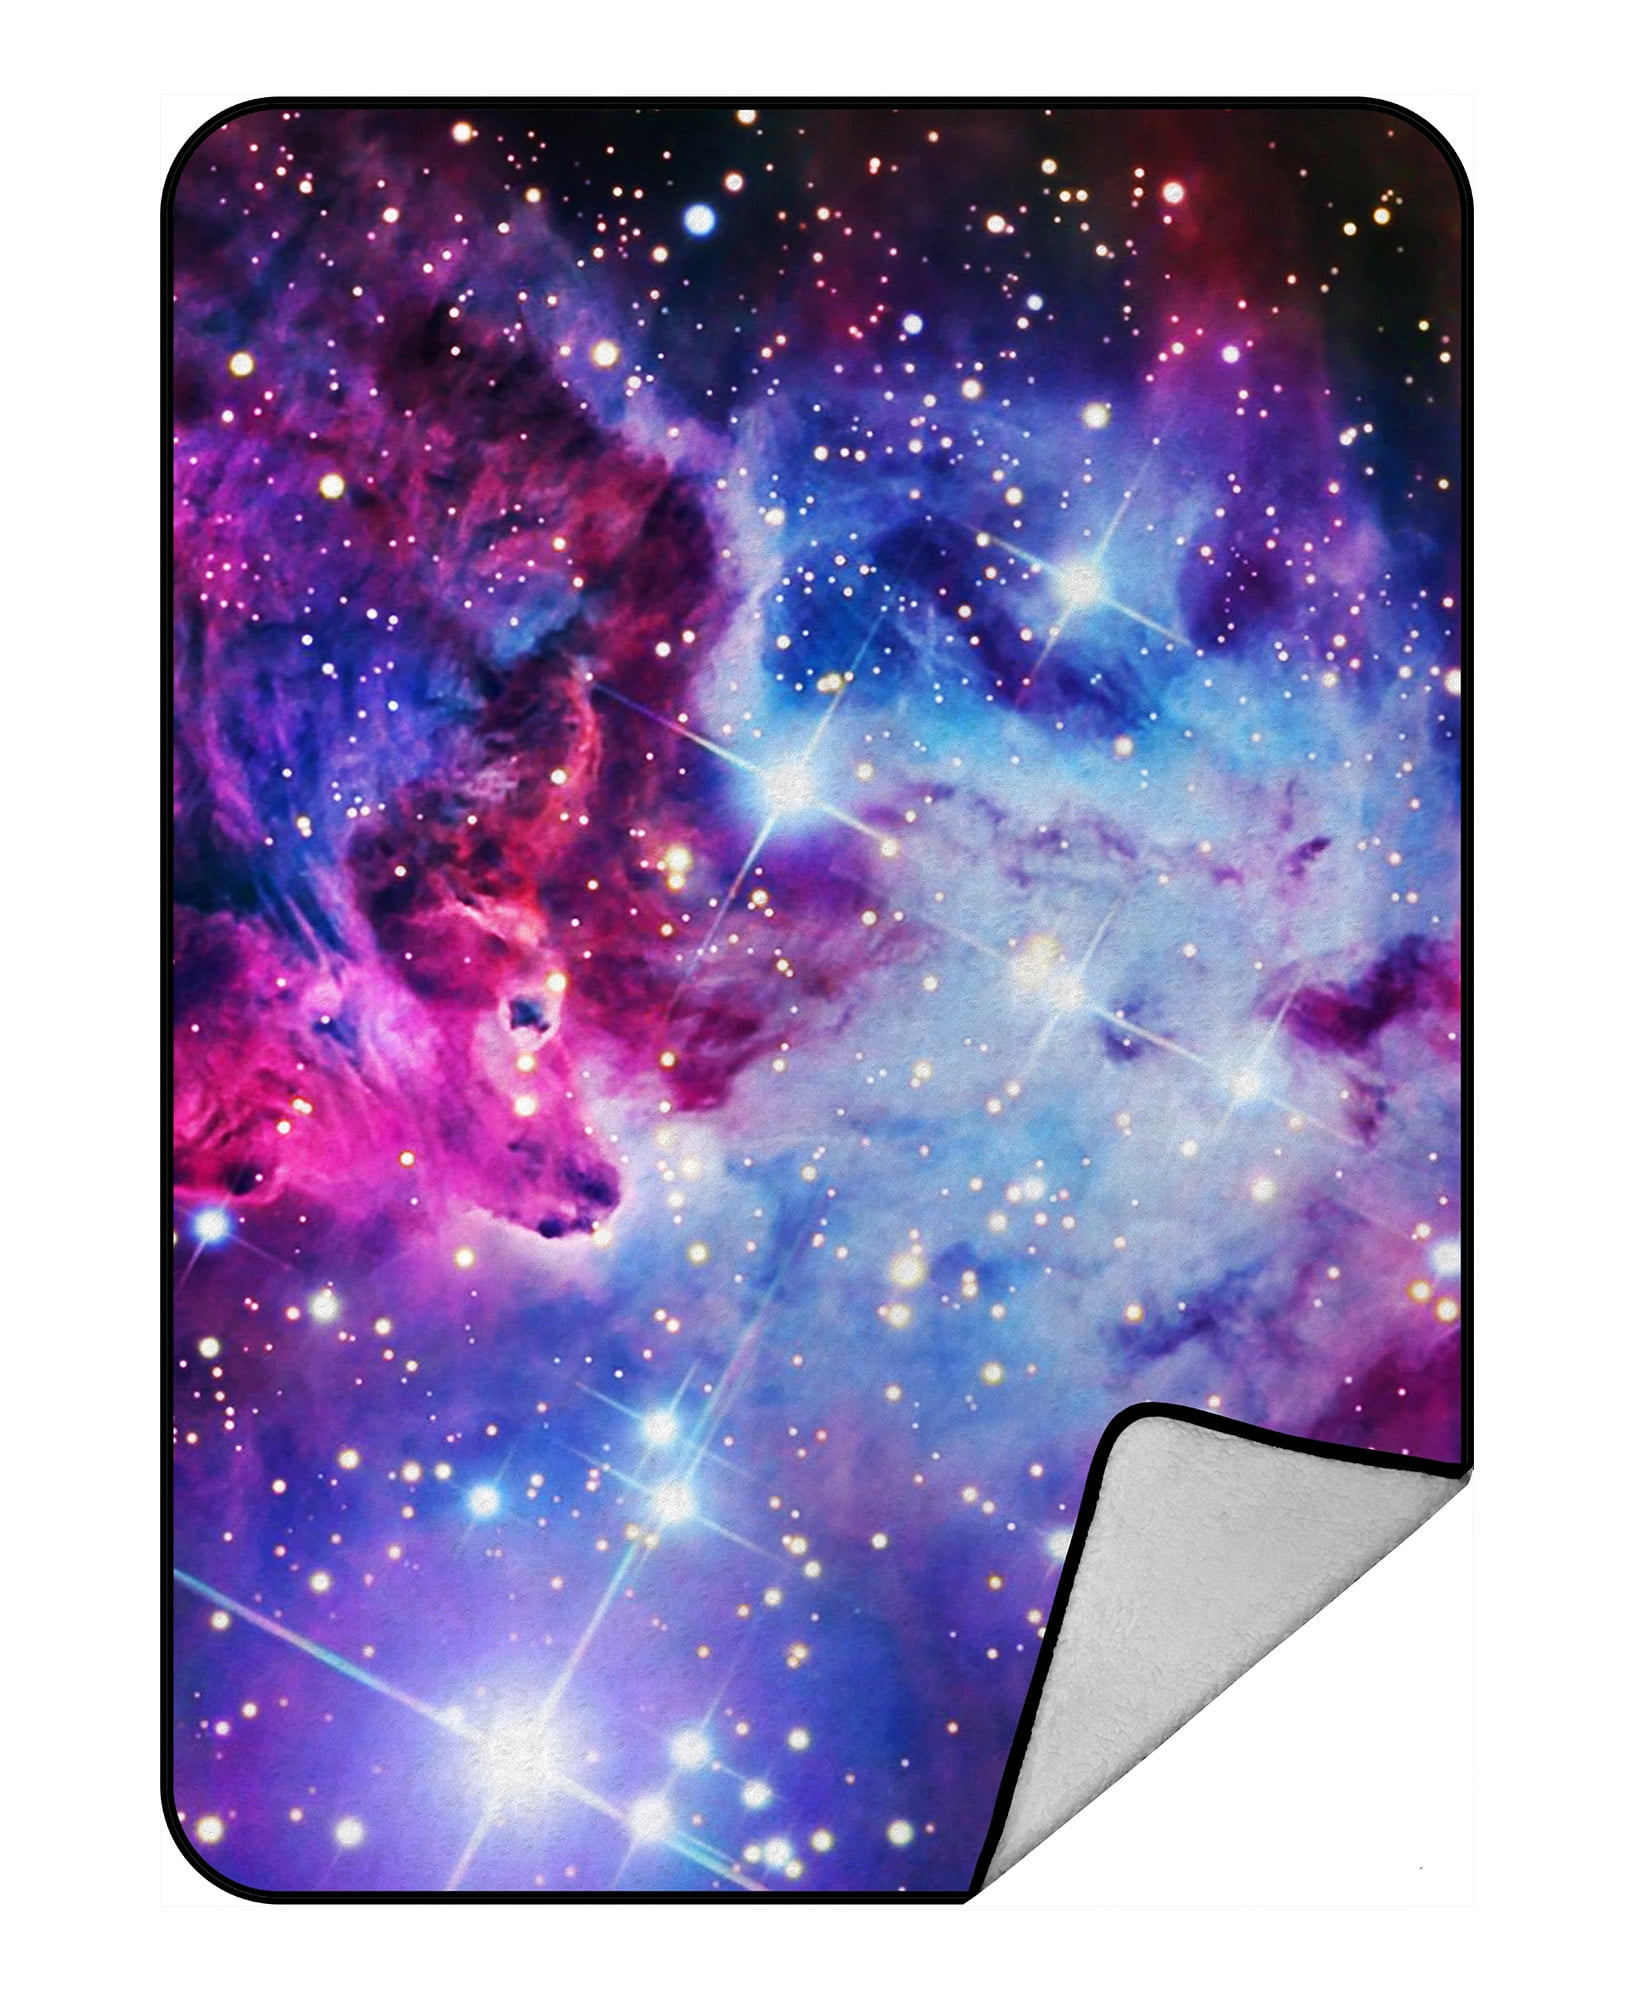 50X60 Britimes Star Galaxy Fuzzy Flannel Throw Blankets Soft Blankets and Throws Daughter Mom Friend Gift Star Galaxy Print Decorative Throw Blankets for Couch 